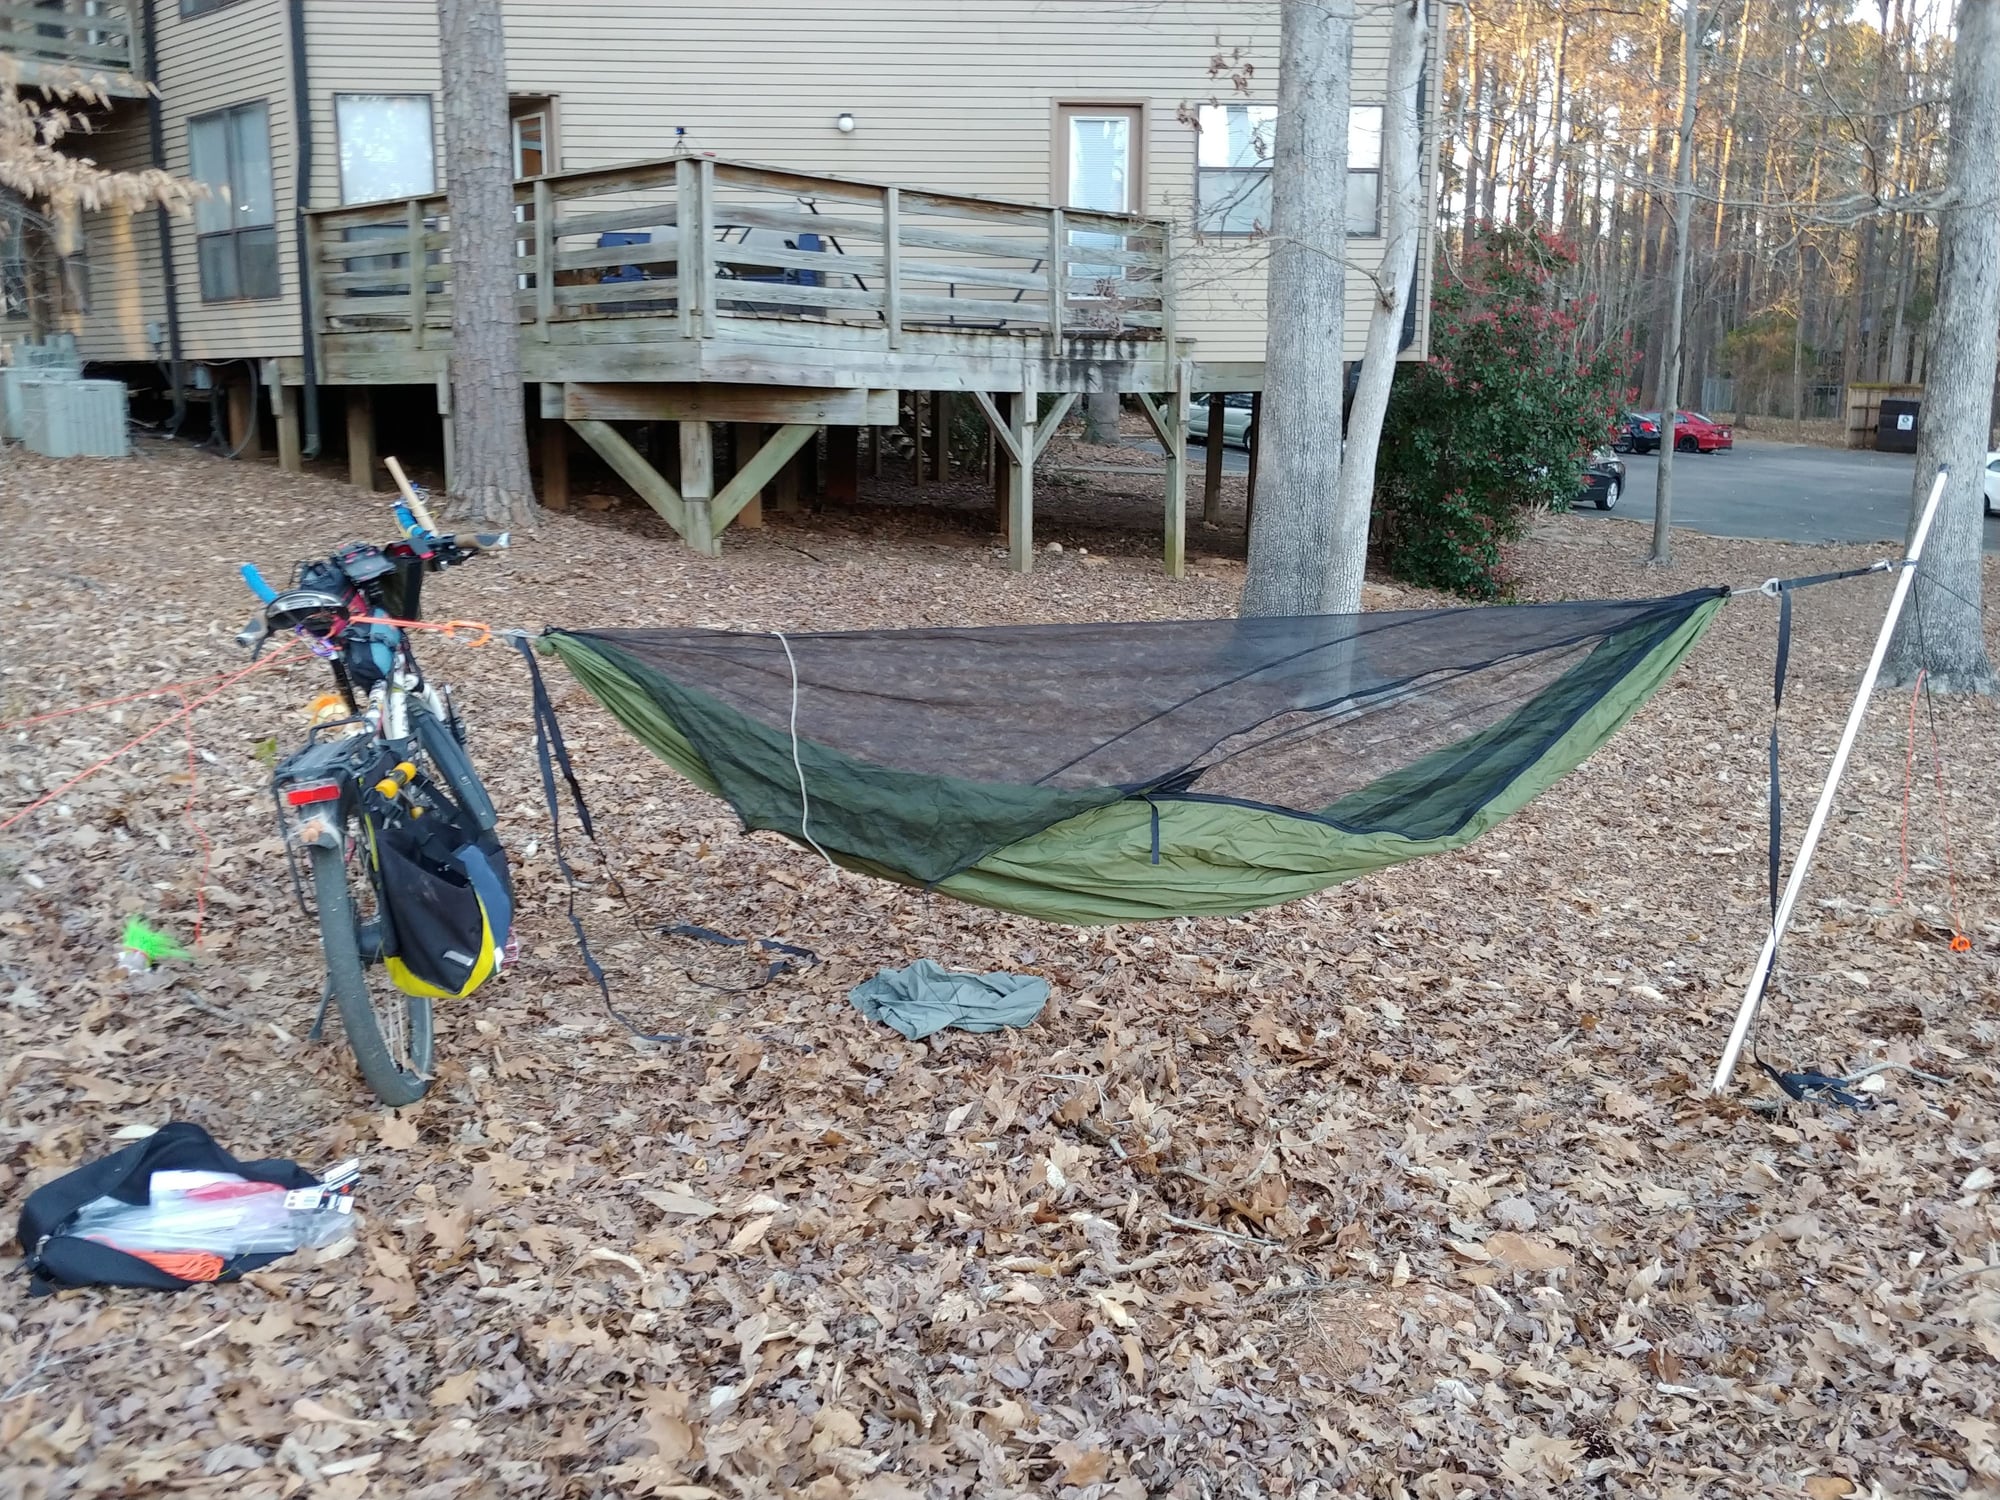 But what if there are no trees, you silly hammock-camper? - Bike Forums